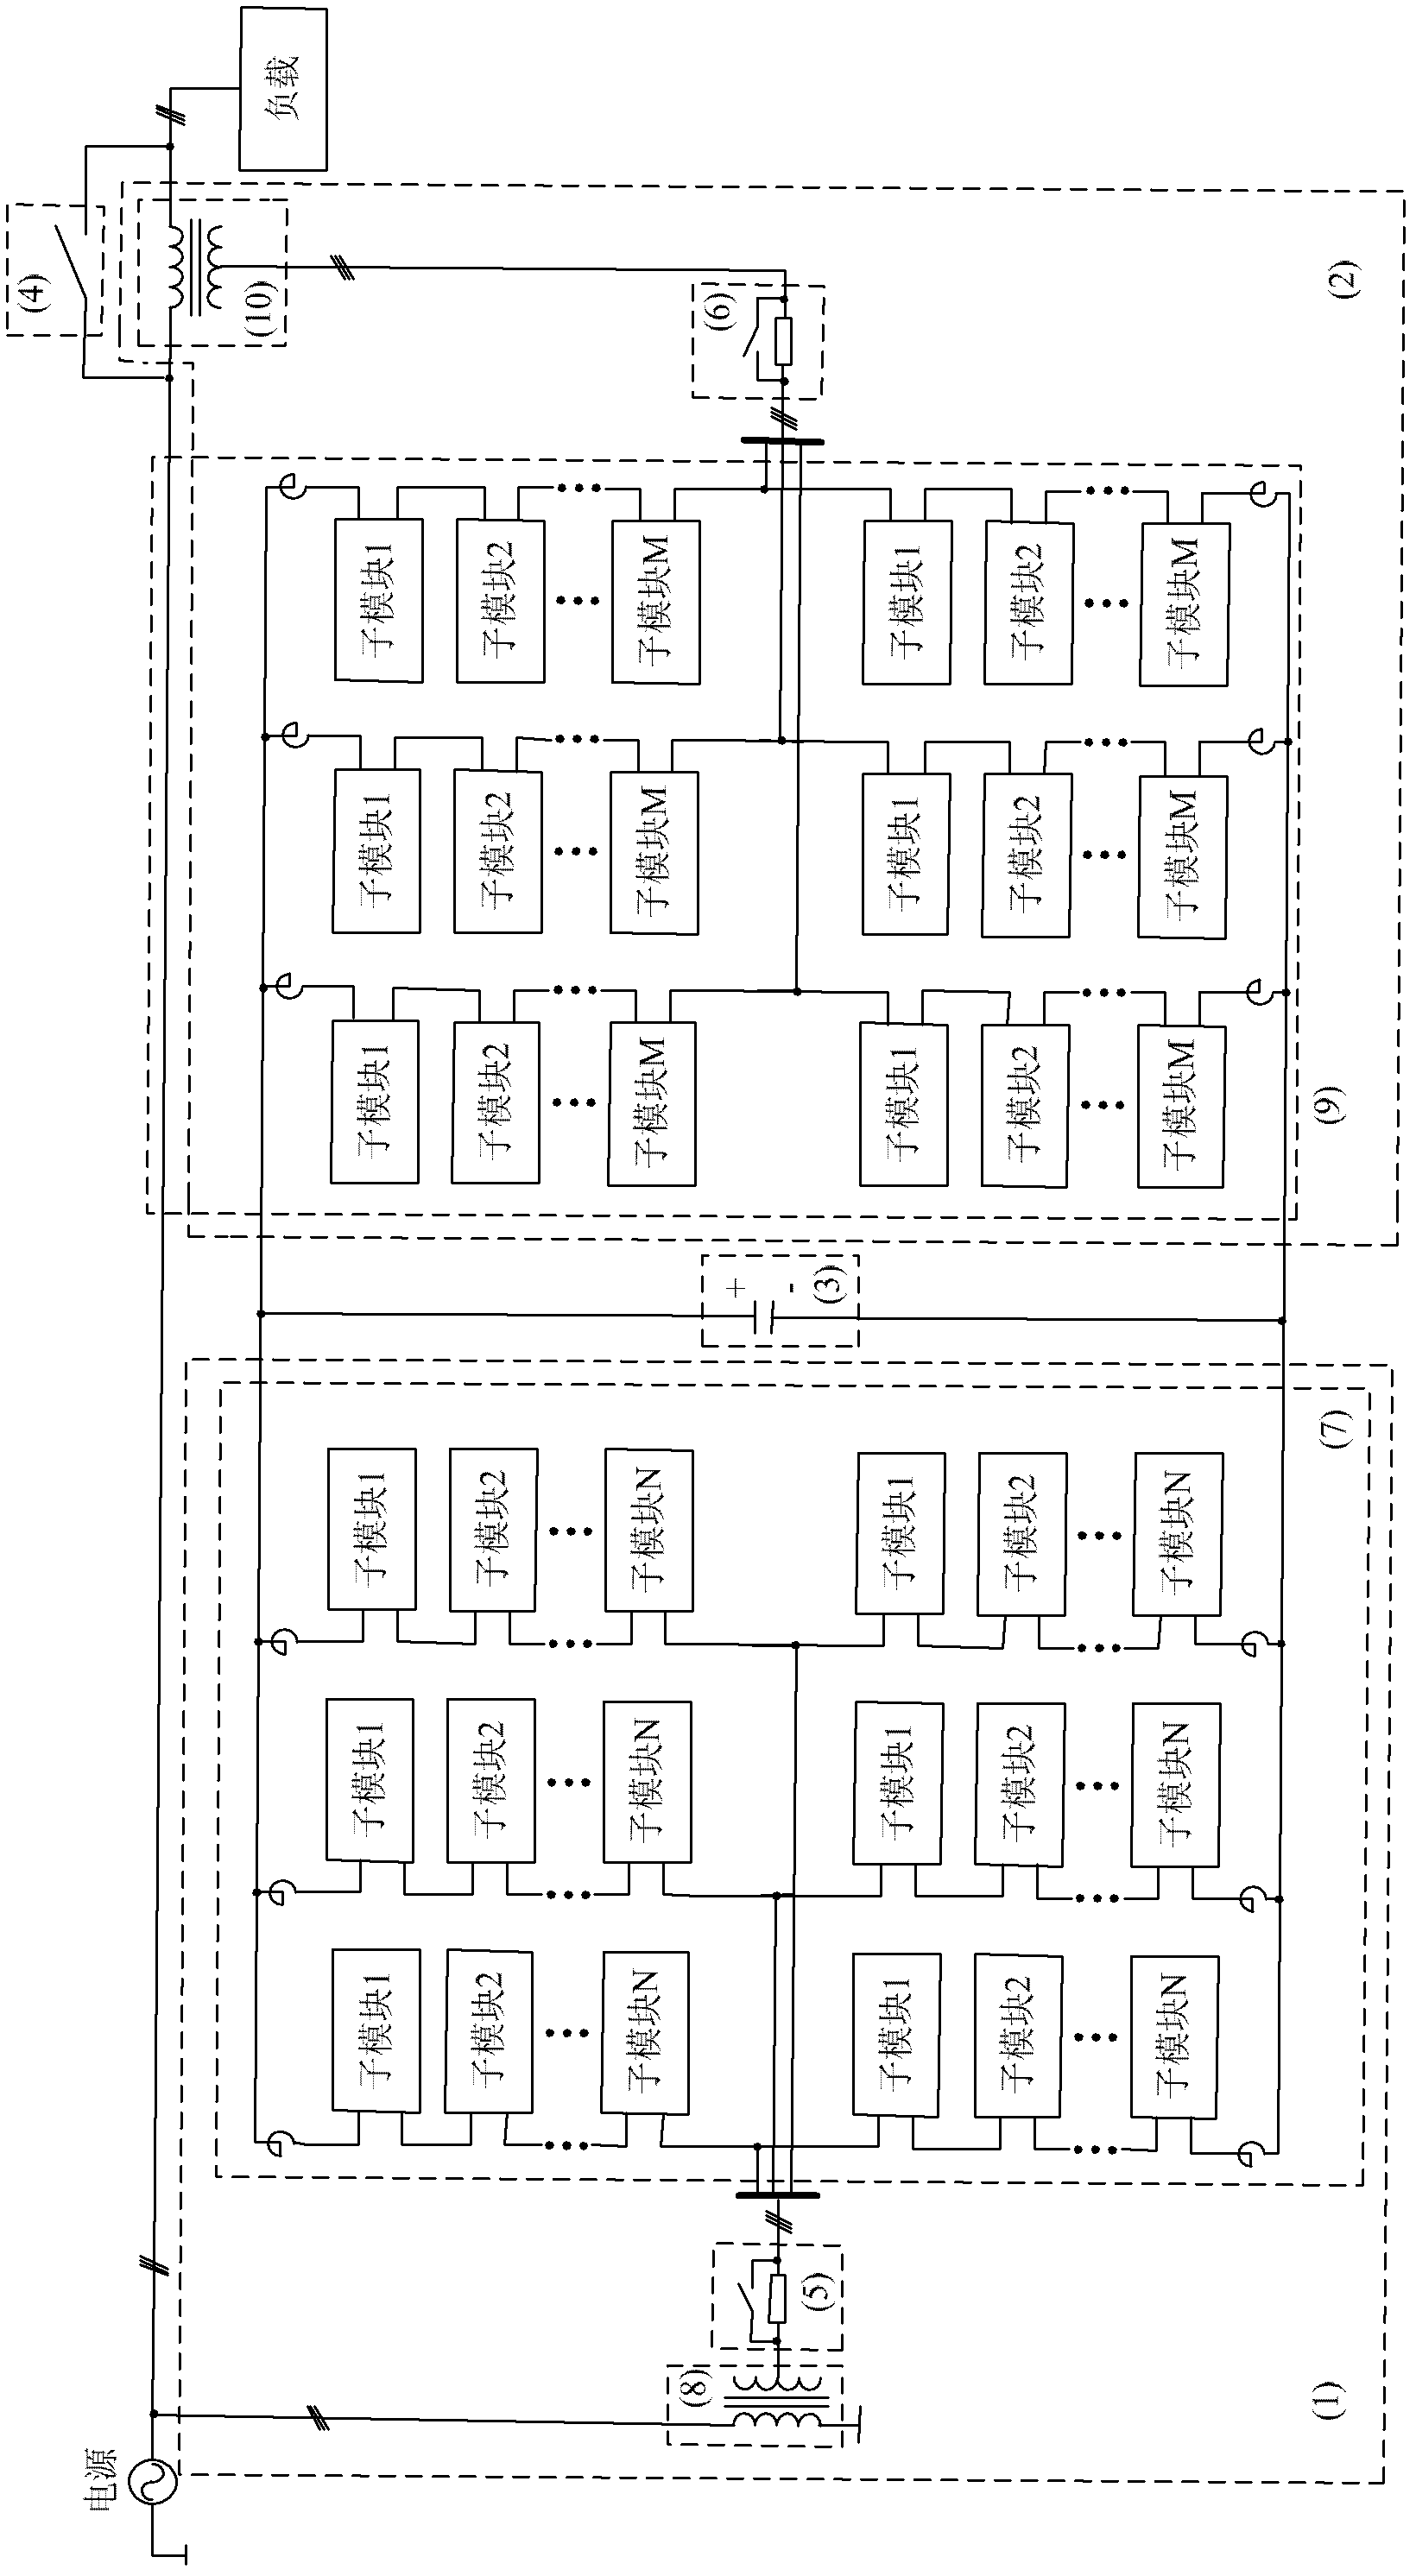 Unified power flow controller based on modular multilevel converter structure